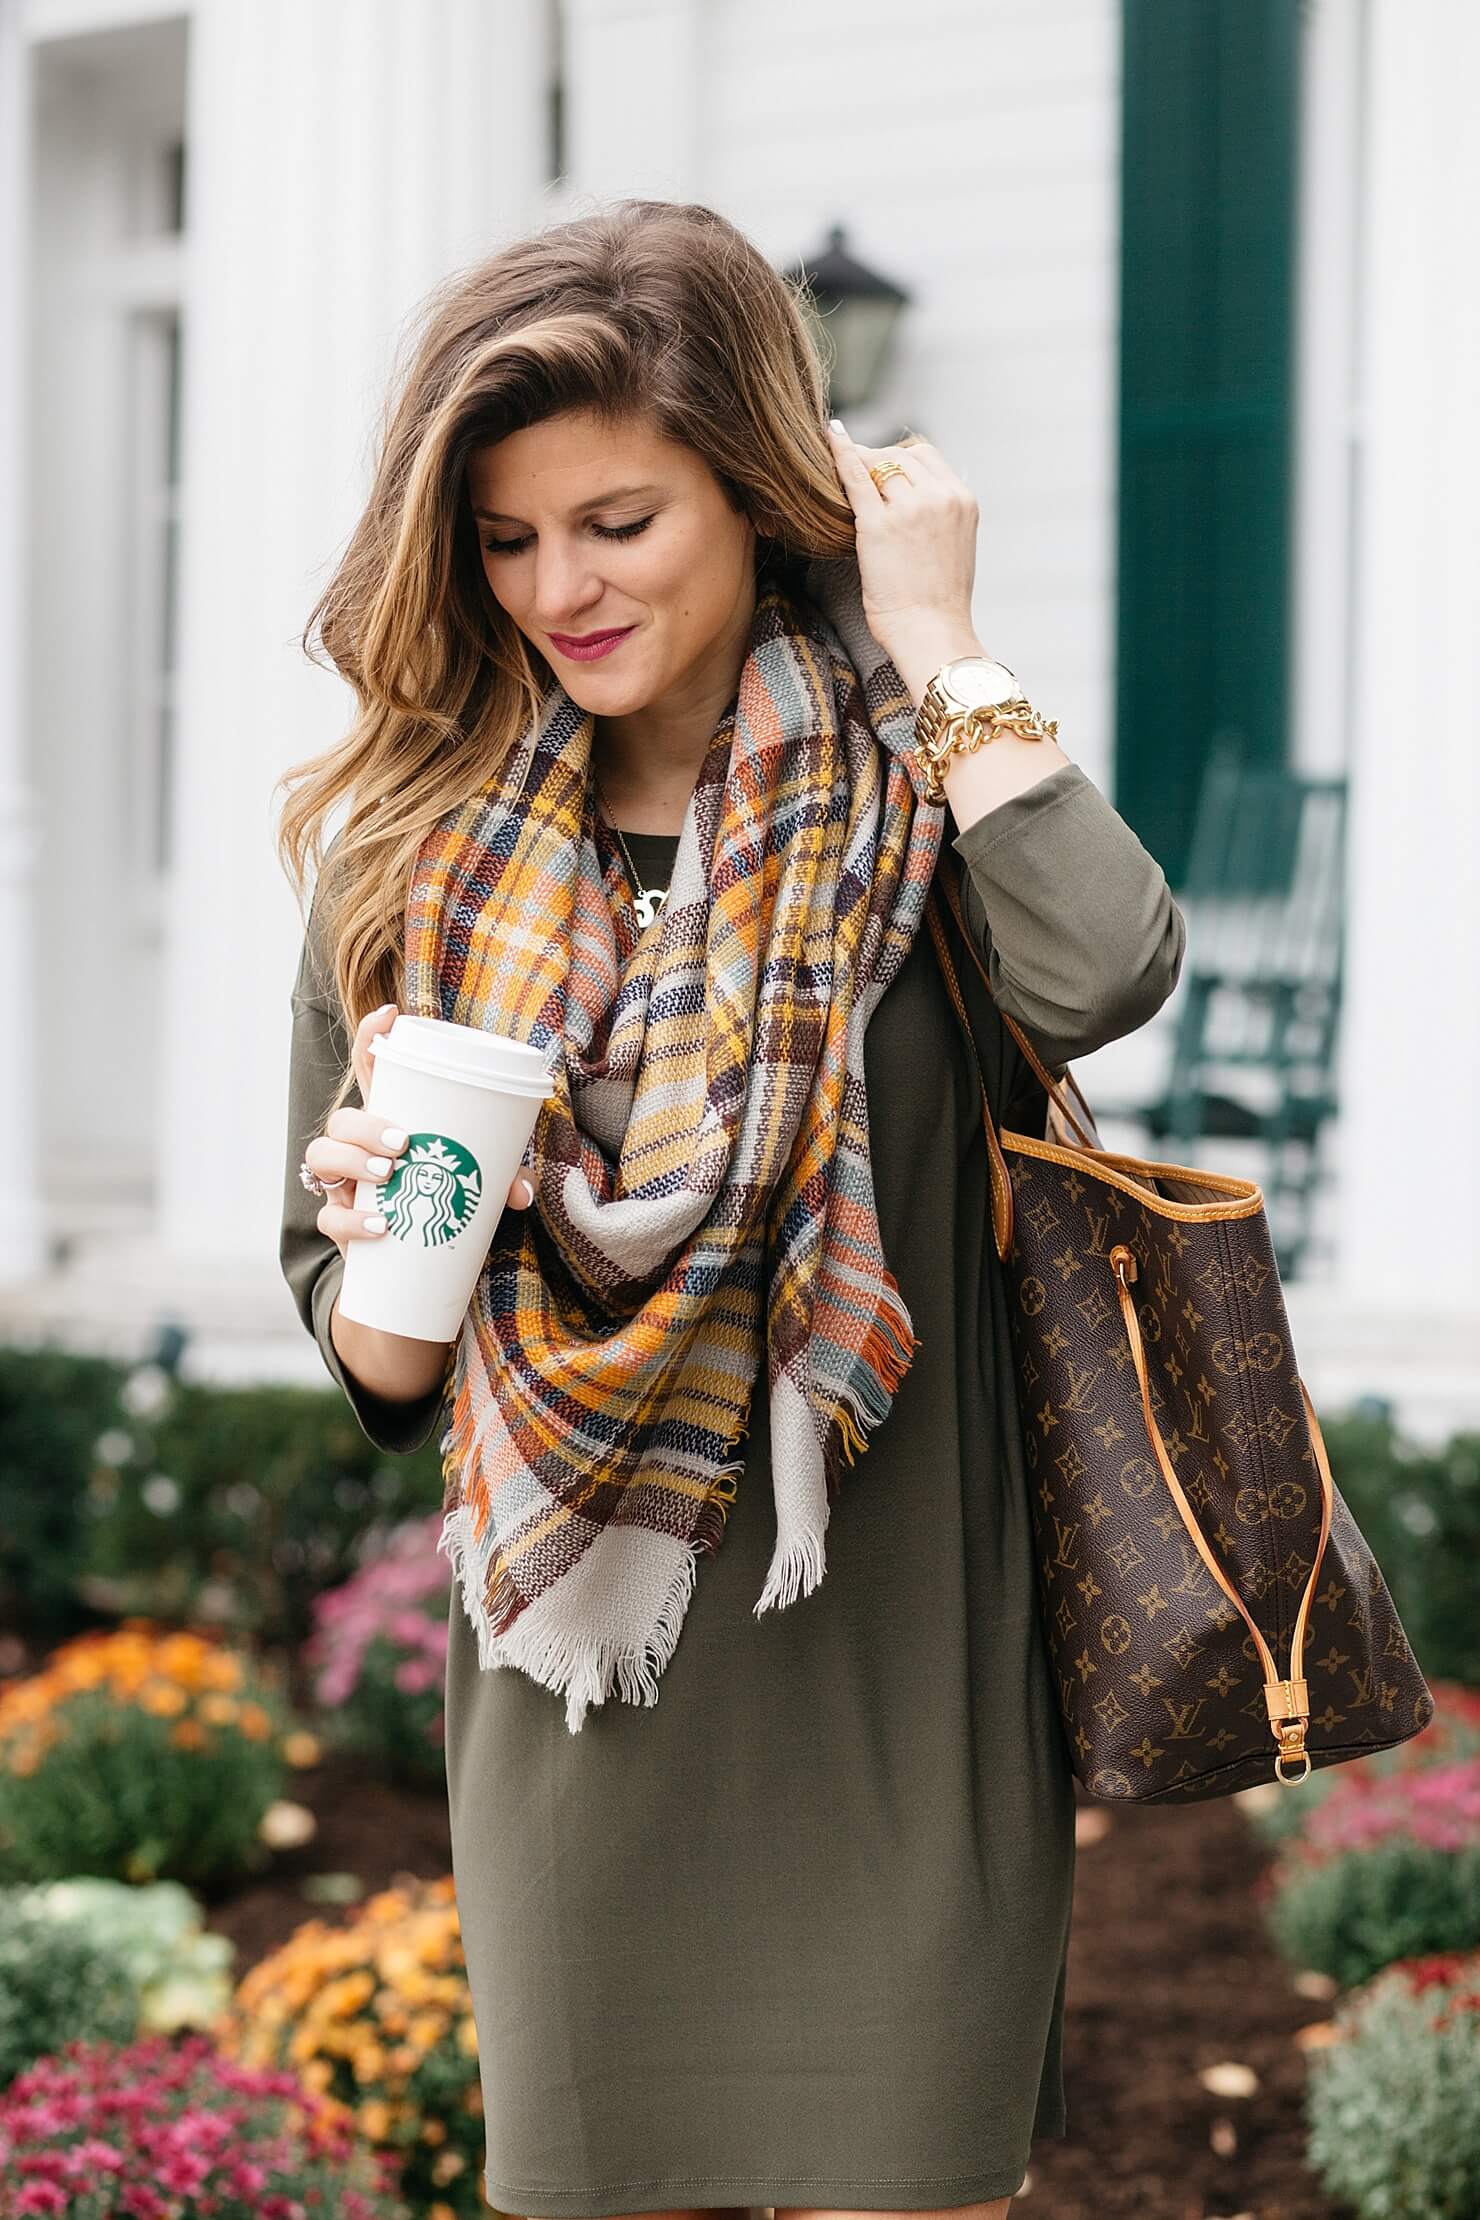 Fall dress and scarf outfit, Leith olive green 3/4 sleeved-dress, plaid blanket sarf, michael kors watch and baublebar bracelet, LV neverfull monogram tote